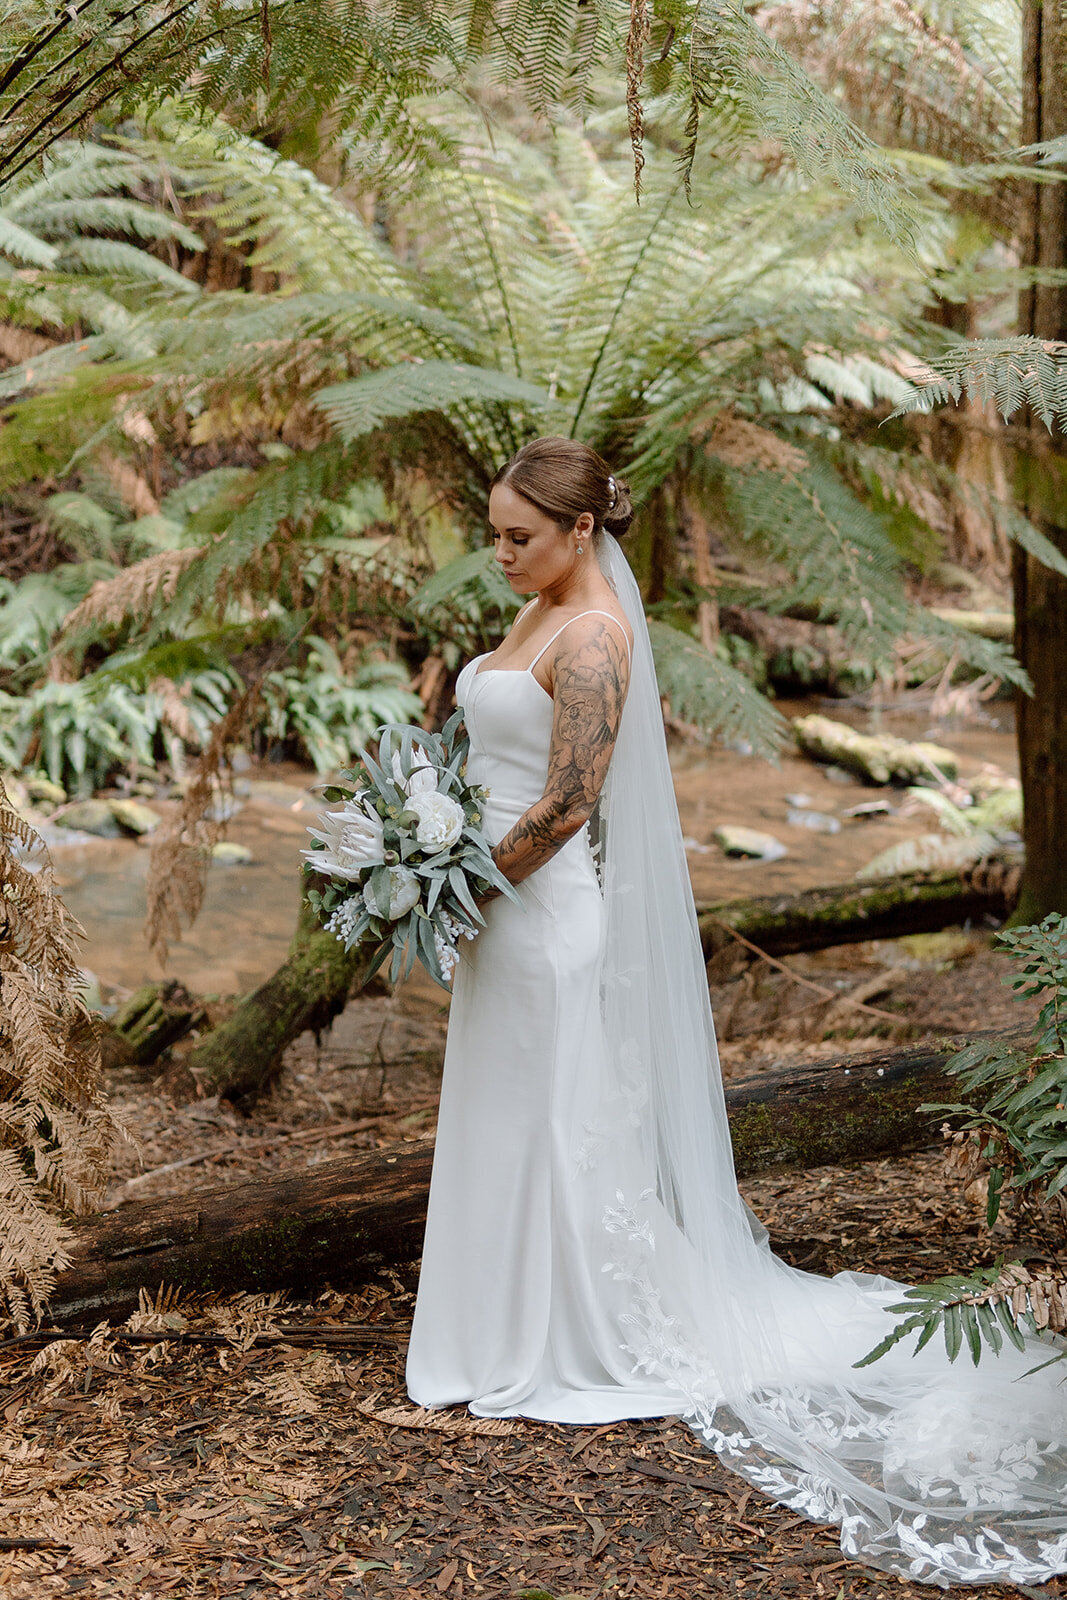 Stacey&Cory-Coast&Pines-223